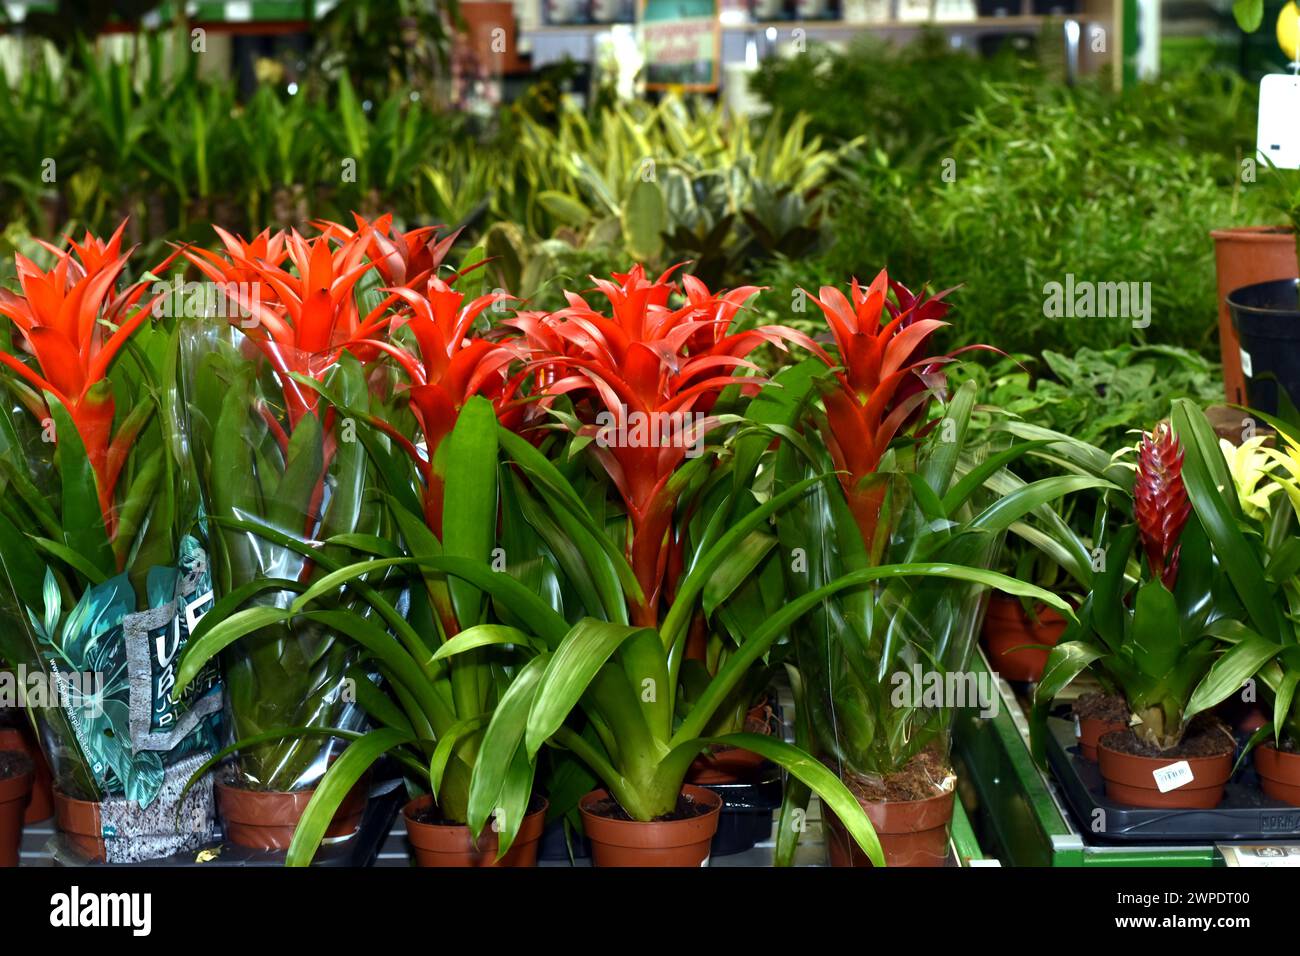 House flowers growing in pots called Guzmania. Stock Photo